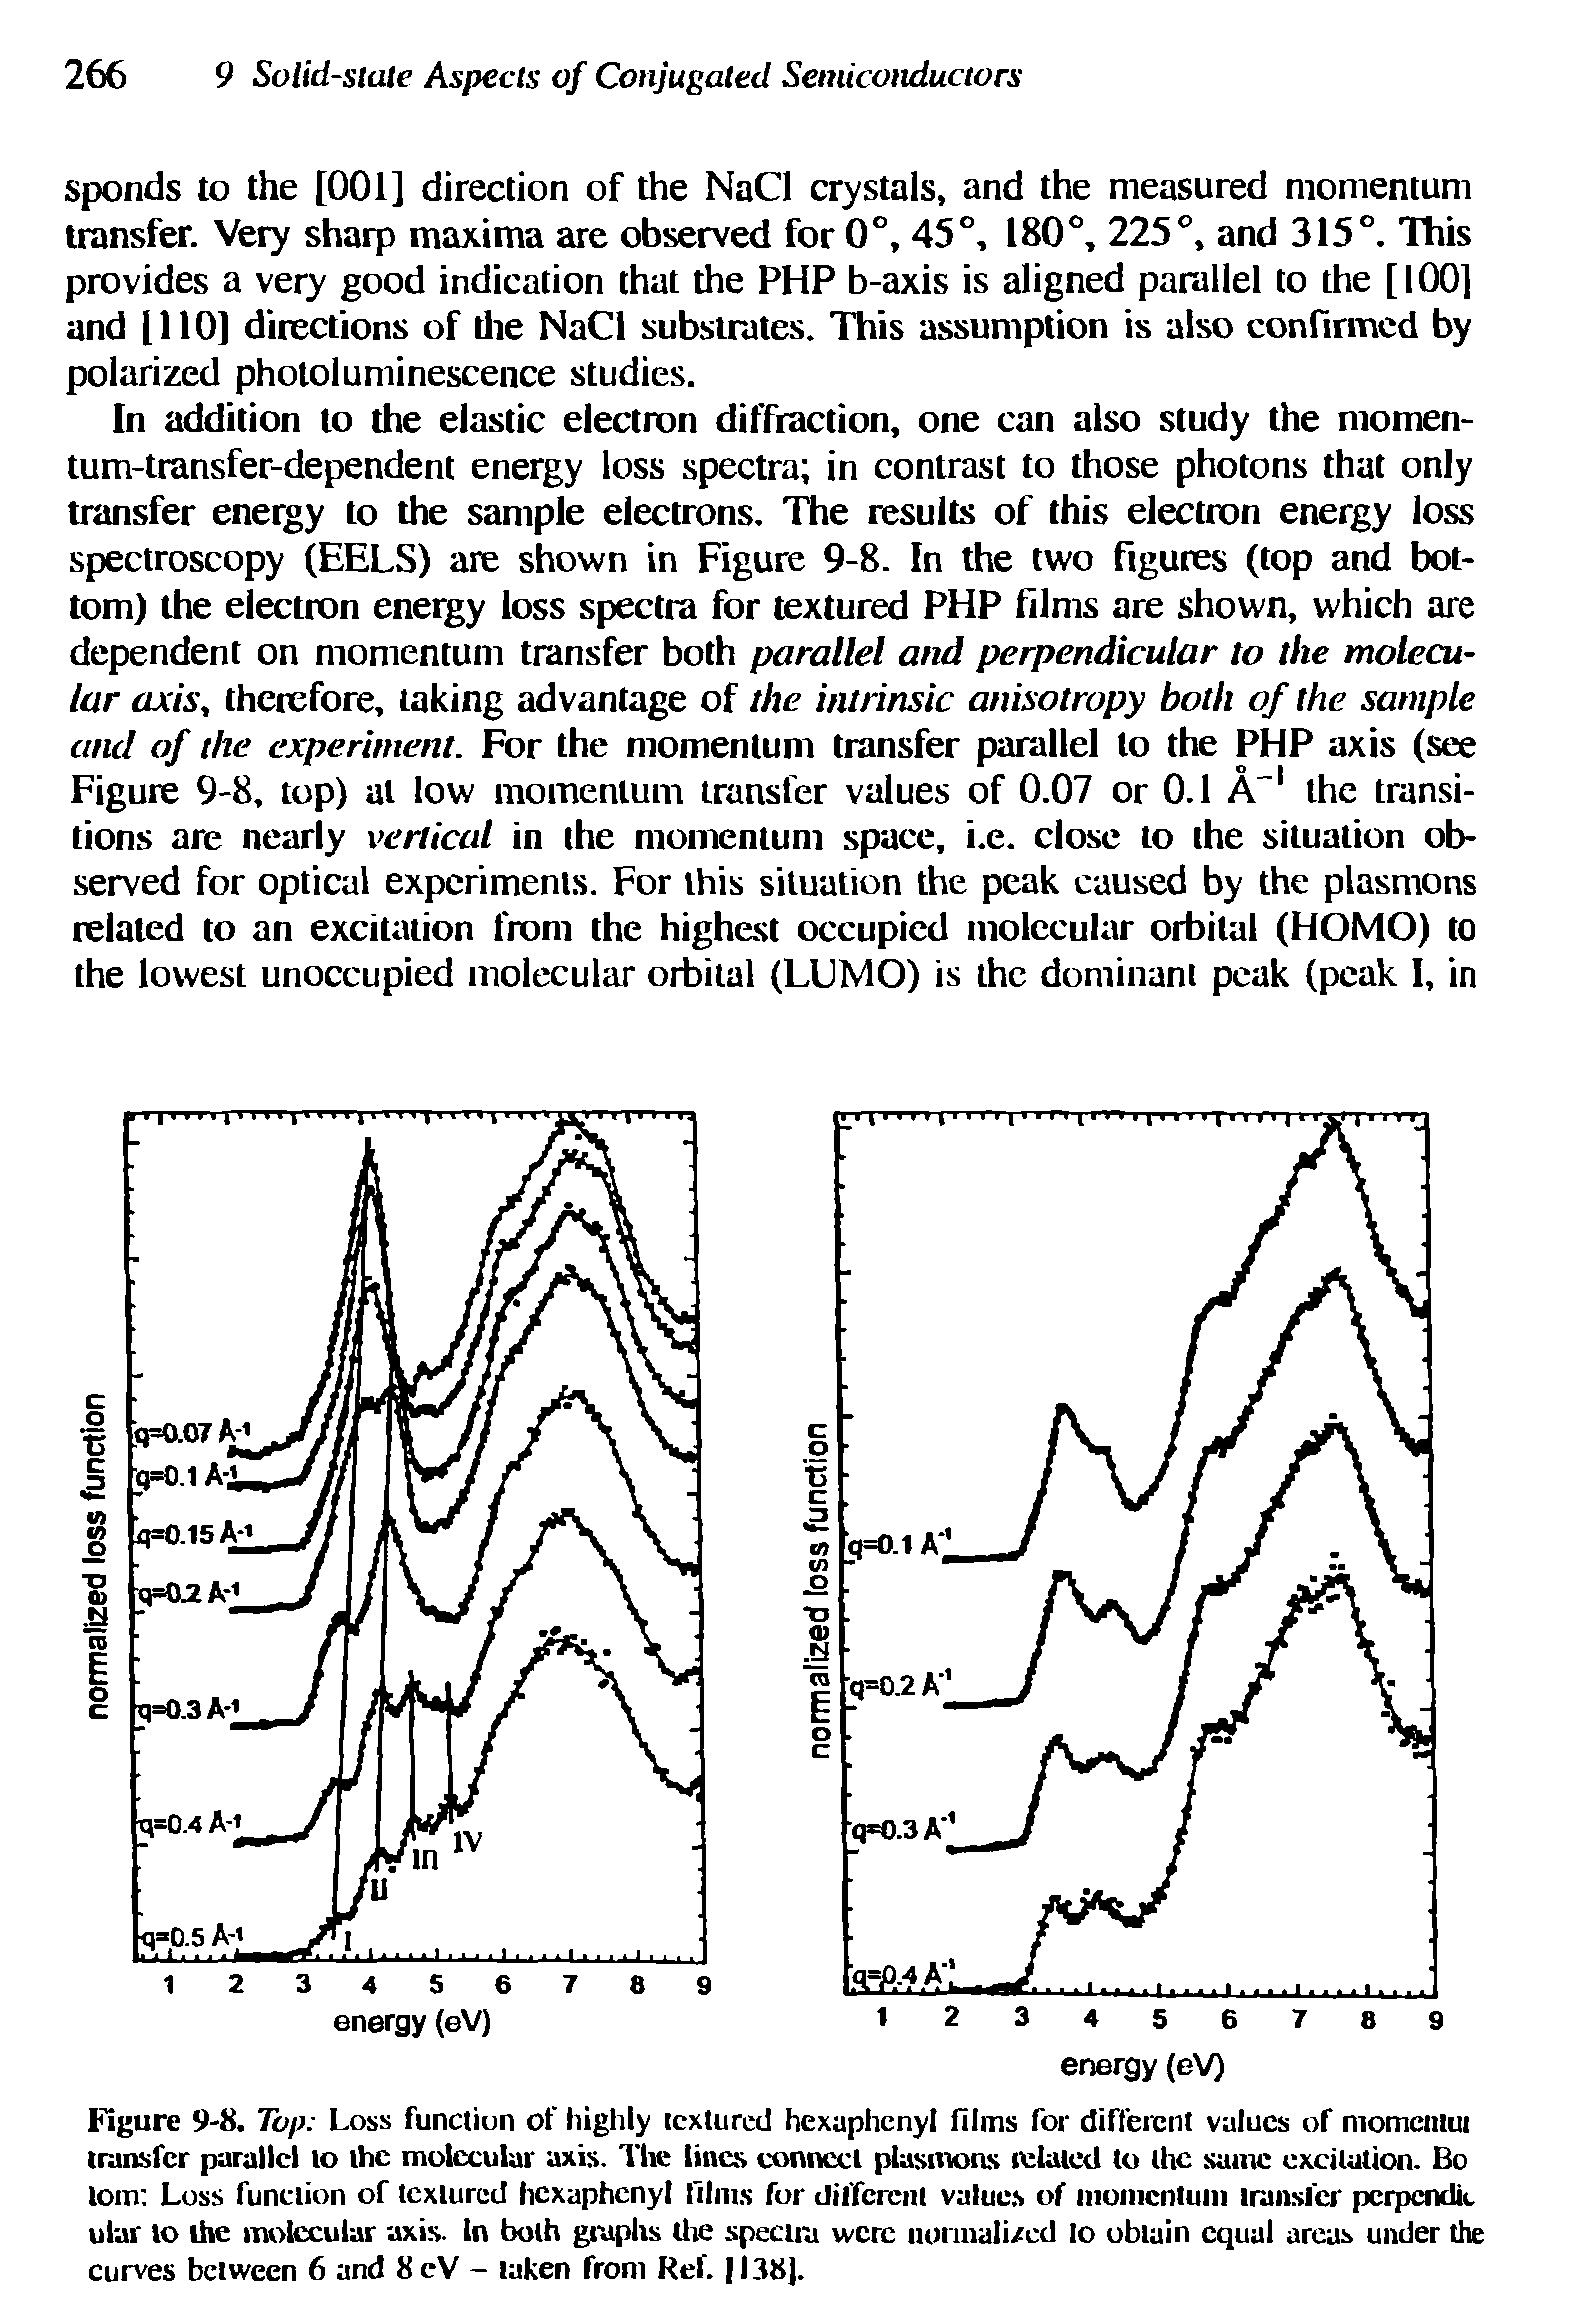 Figure 9-8. Top Loss functiun of highly textural liexuphenyl films for different values of niomcmut transfer parallel to the molecular axis. The tines connect plasinons related to (he same excitation. Bo tom Loss function of textured hexaphenyt films for different values of momentum transfer pcrpcndii. ular to the molecular axis. In both graphs tire spectra were uorinali/al lo obtain equal areas under the curves between 6 and 8 cV - taken front Kef. 1138].